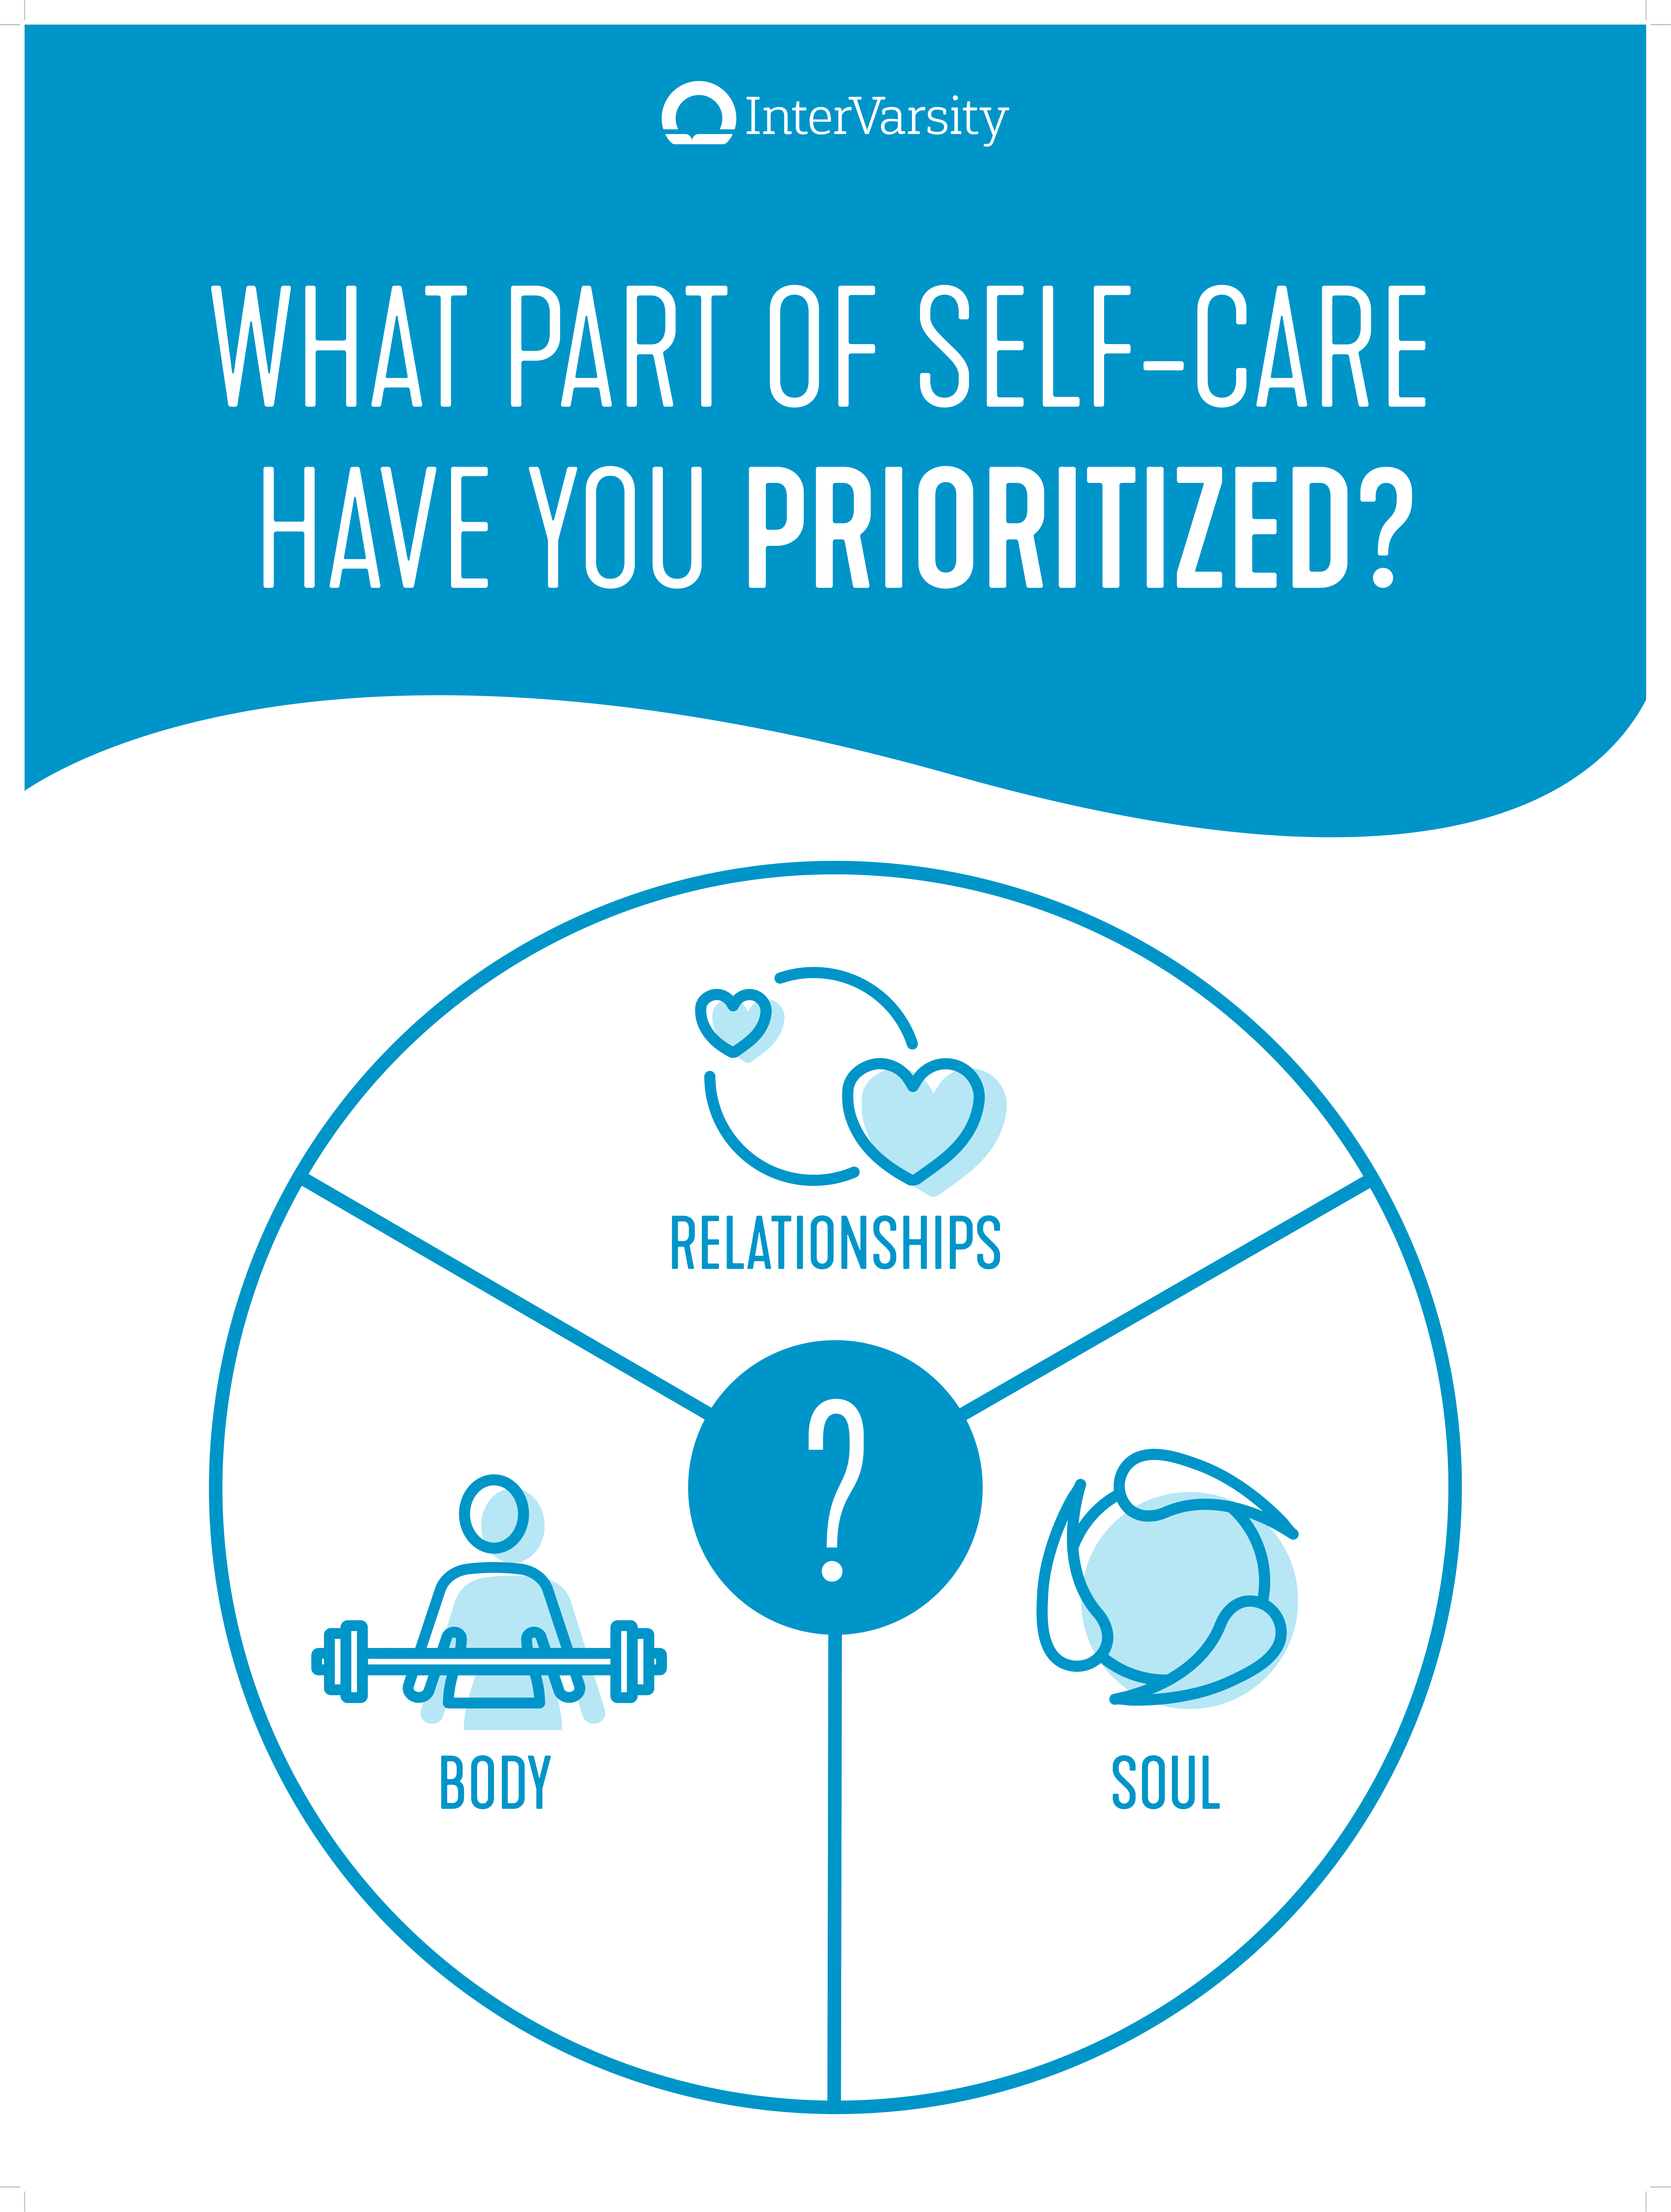 Panel 2: what part of self-care have you prioritized?